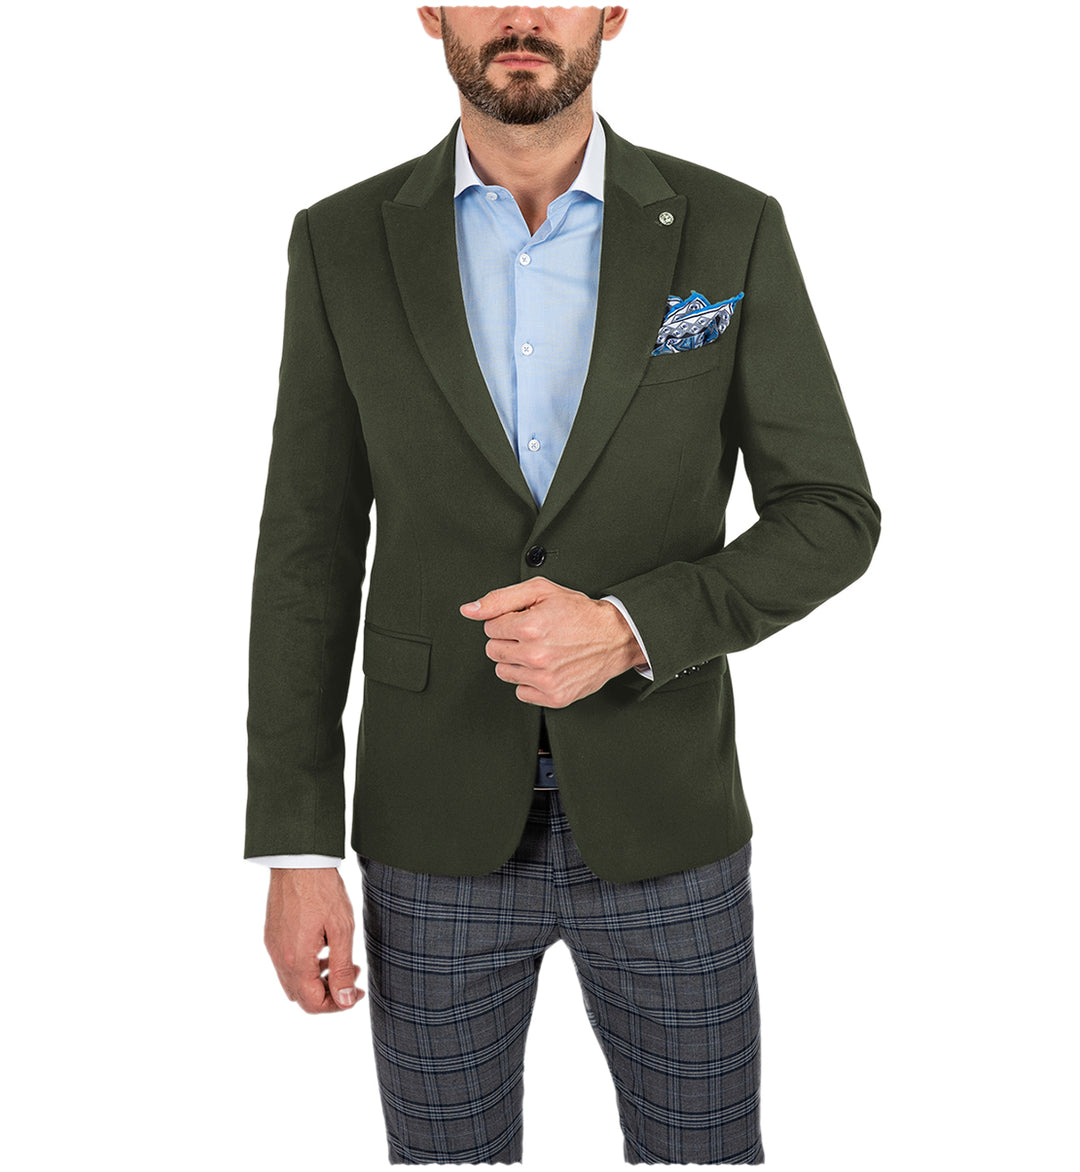 What kind of suit is an ideal travel suit? – mens event wear